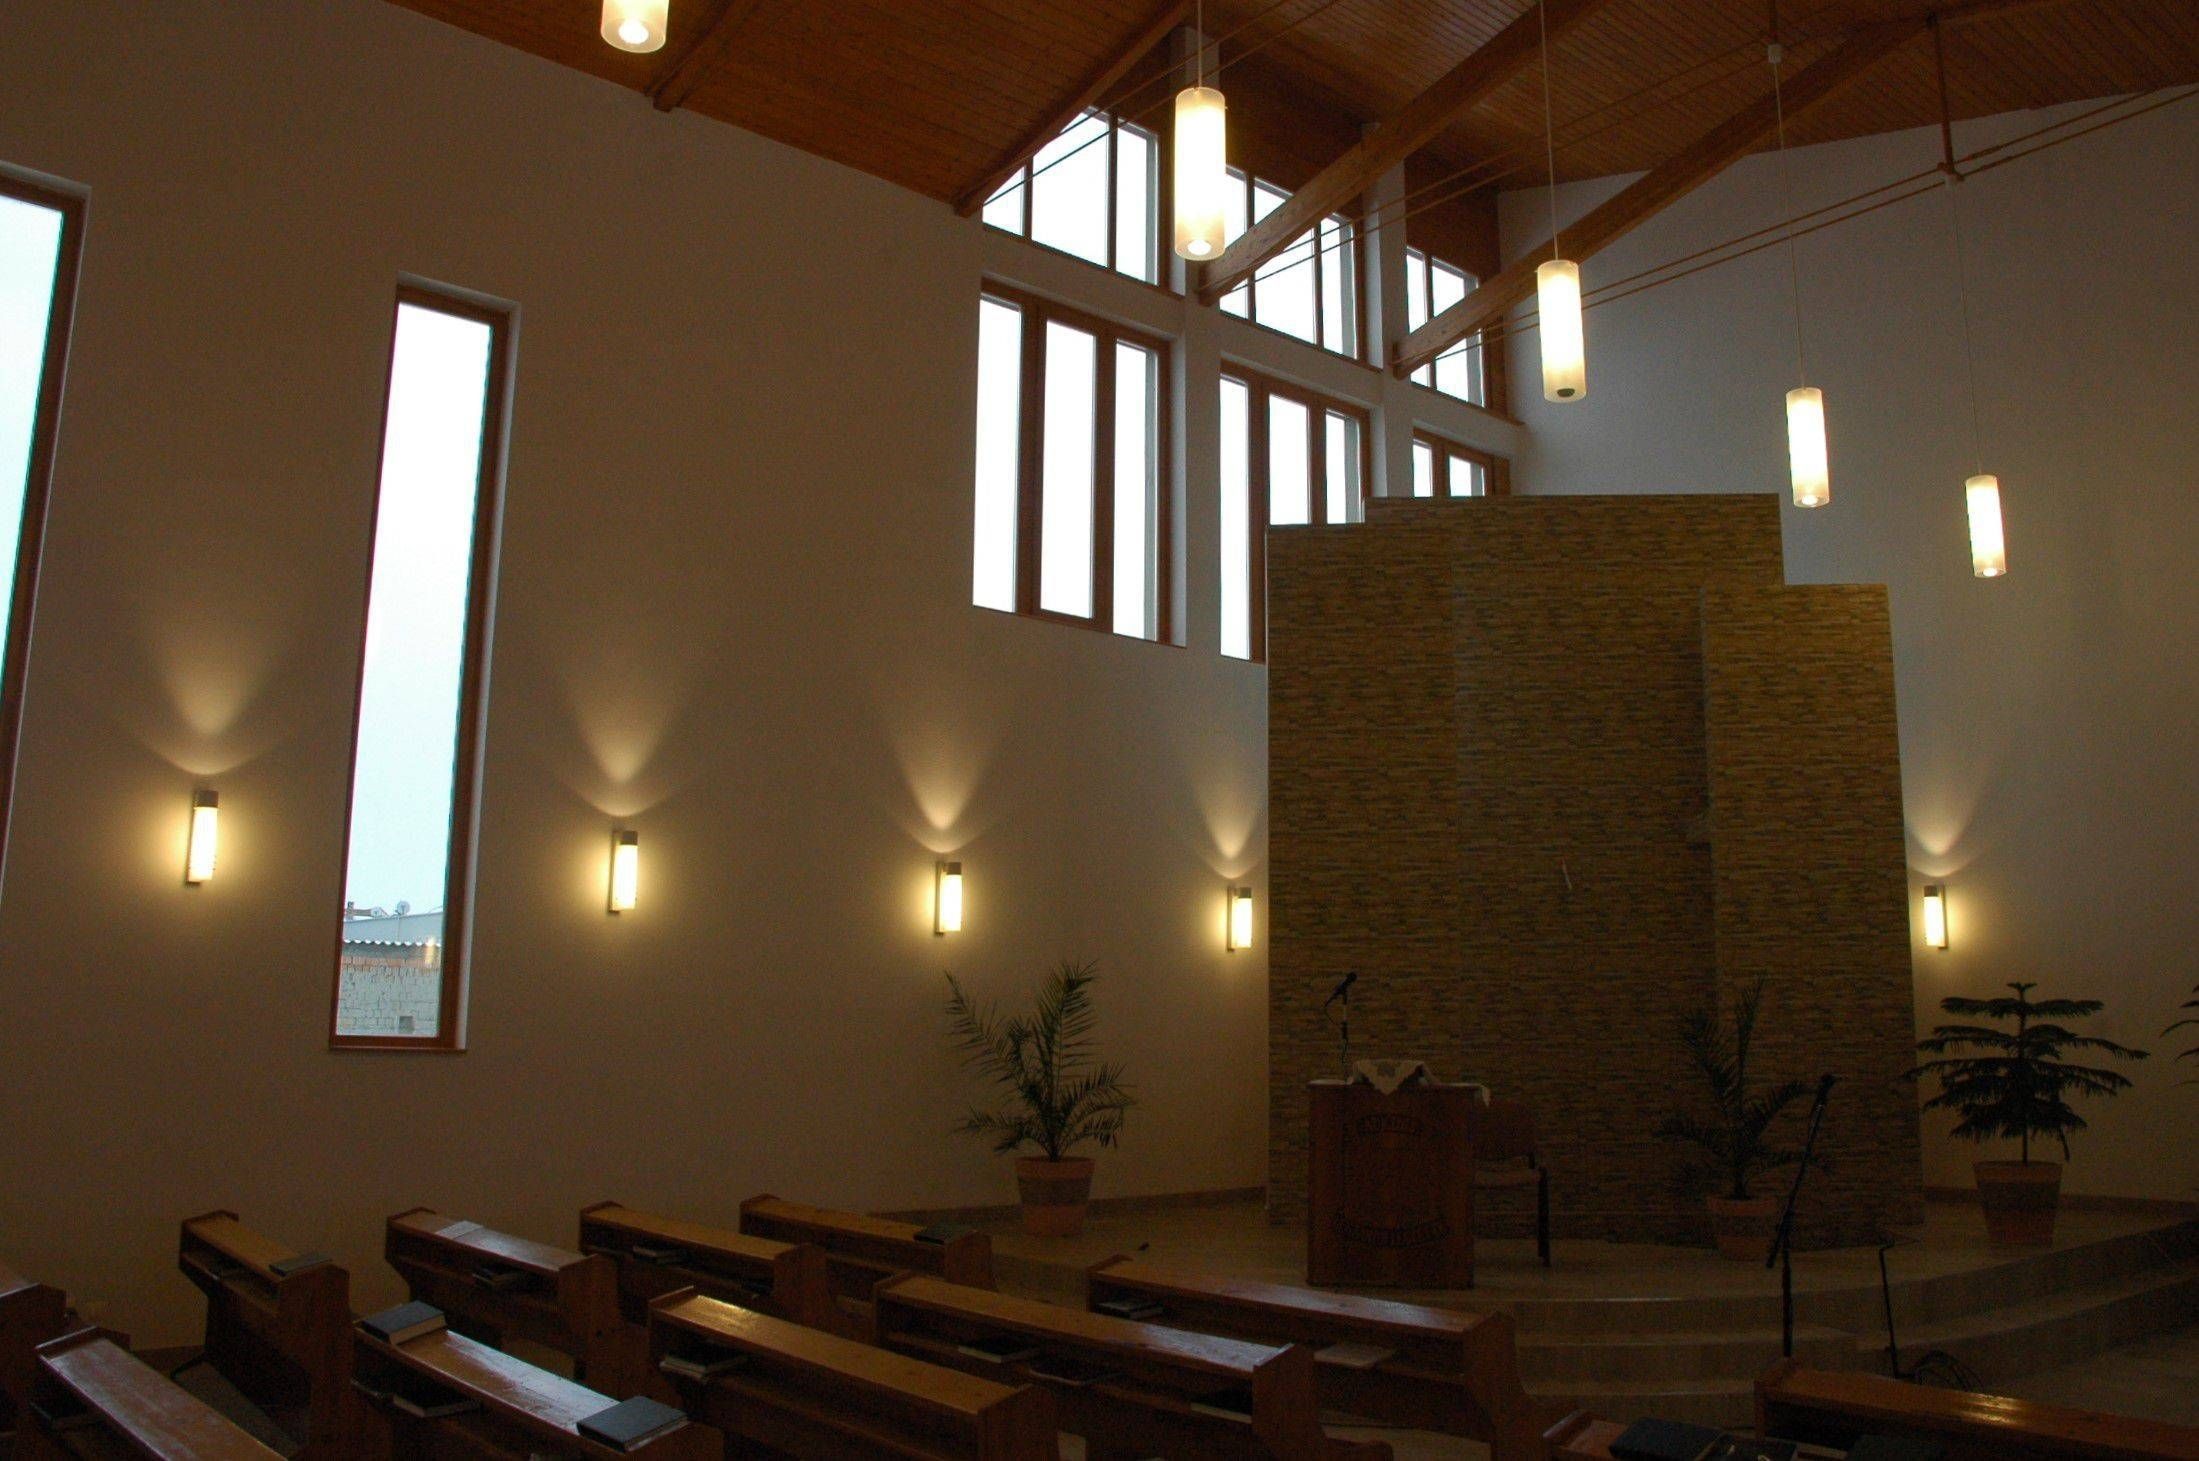 Perfect Church Pendant Lights 65 On Battery Operated Pendant Light With Regard To Church Pendant Lights (View 5 of 15)